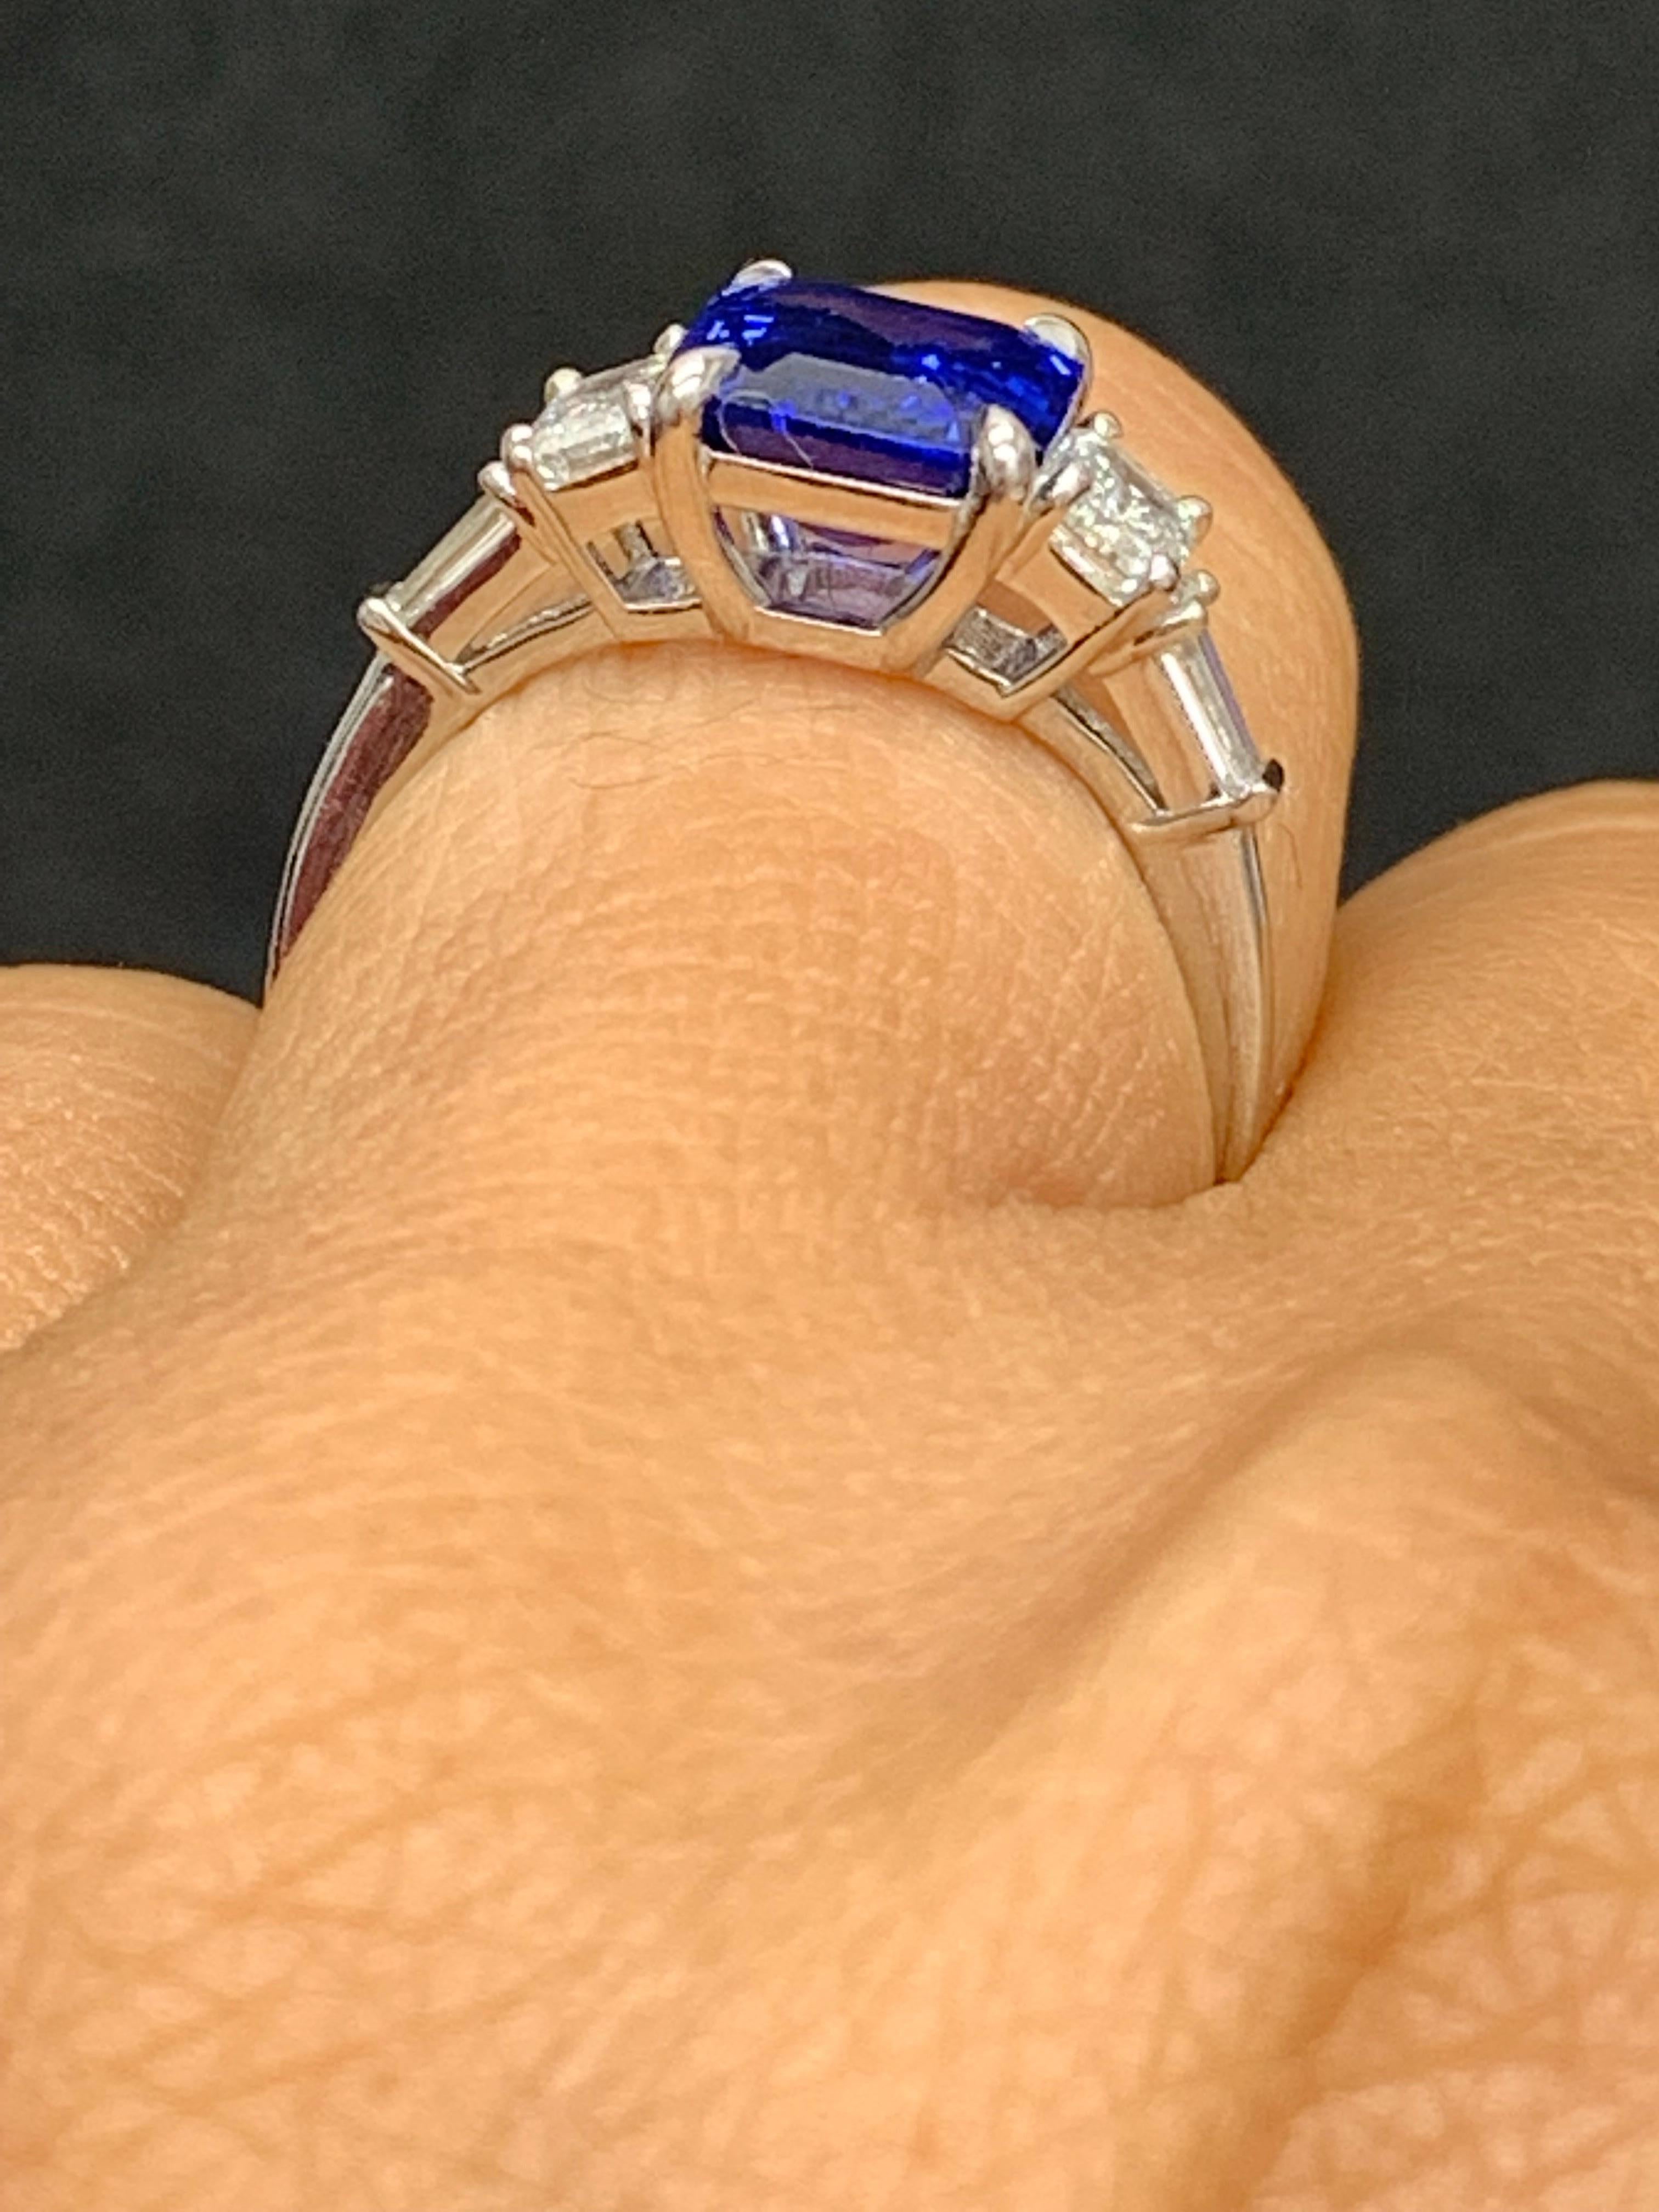 Modern 2.91 Carat Emerald Cut Sapphire and Diamond 5 Stone Ring in Platinum For Sale